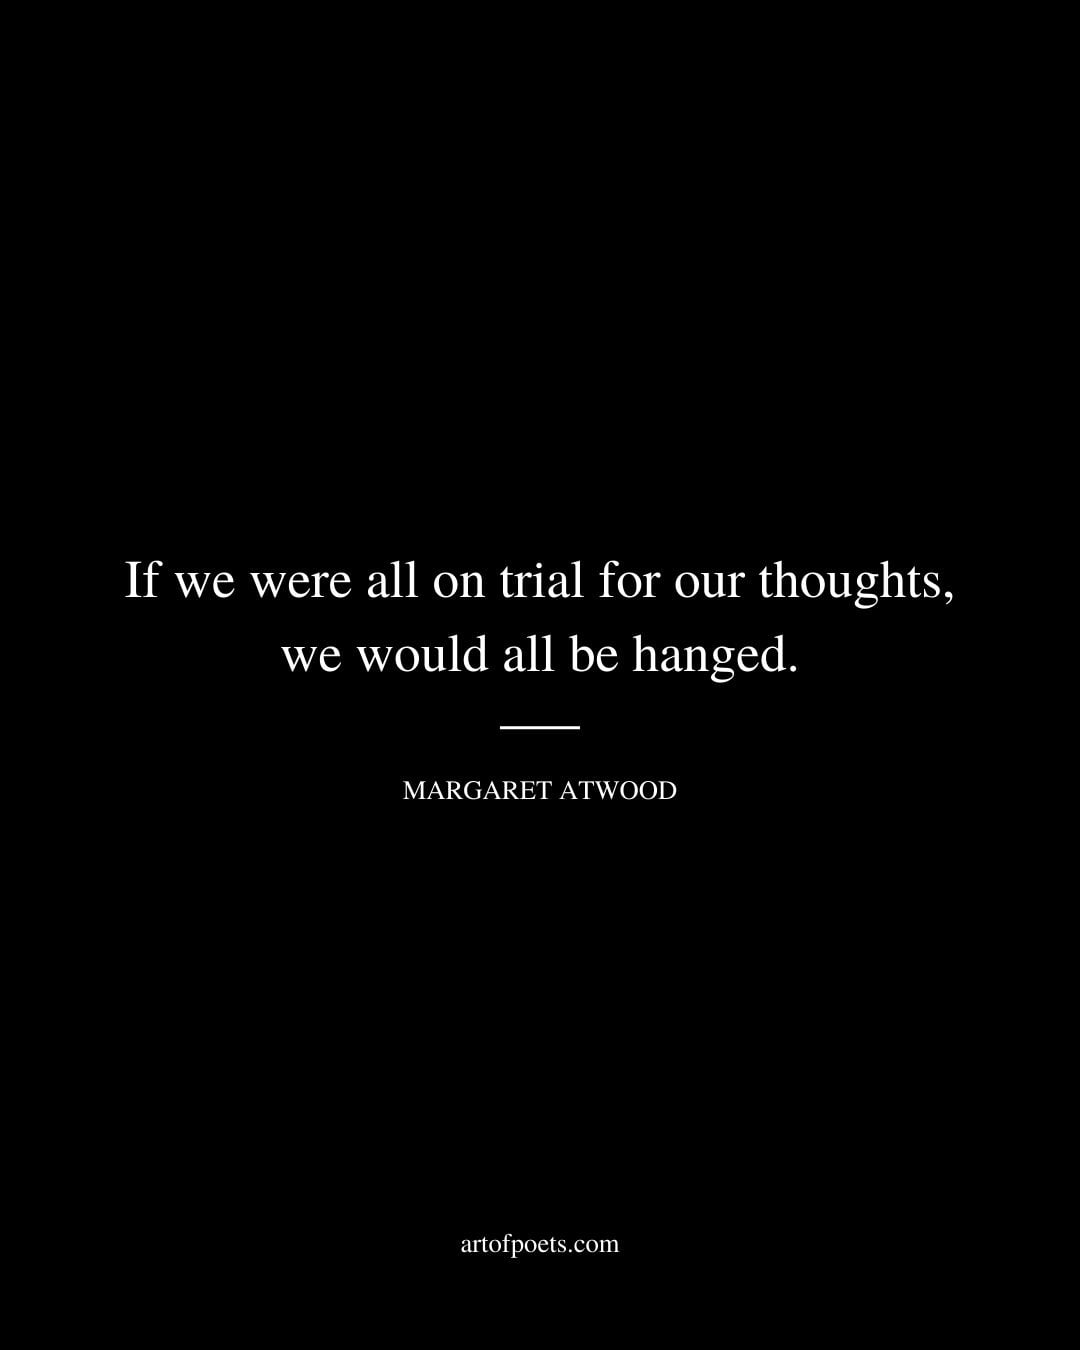 If we were all on trial for our thoughts we would all be hanged. Margaret Atwood